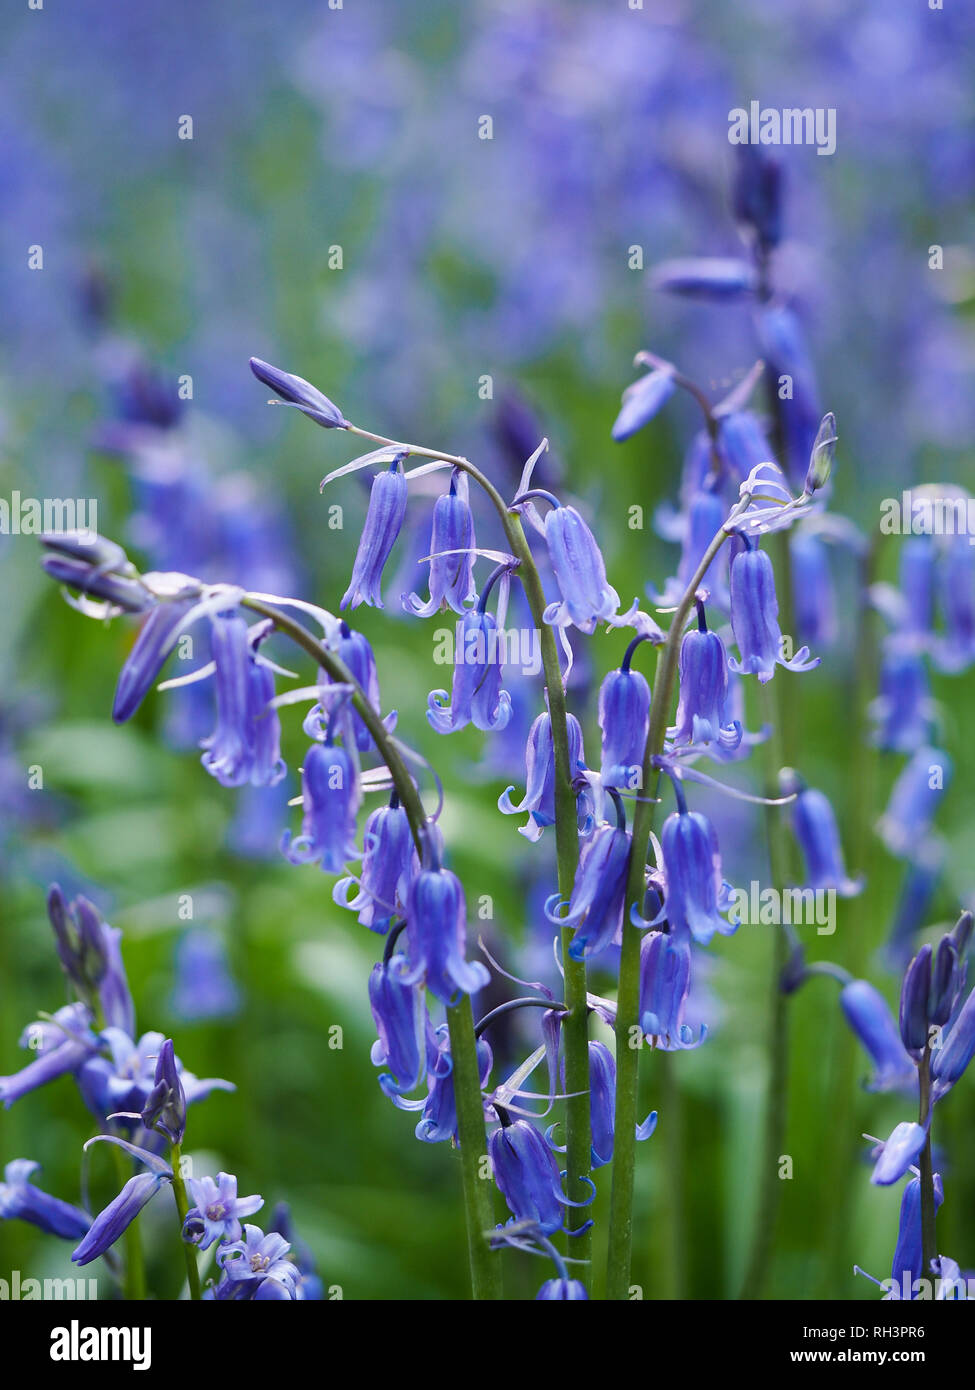 Macro of a clump of wild English bluebells in natural woodland in Hertfordshire.Hyacinthoides non-scripta close-up portrait view. Stock Photo